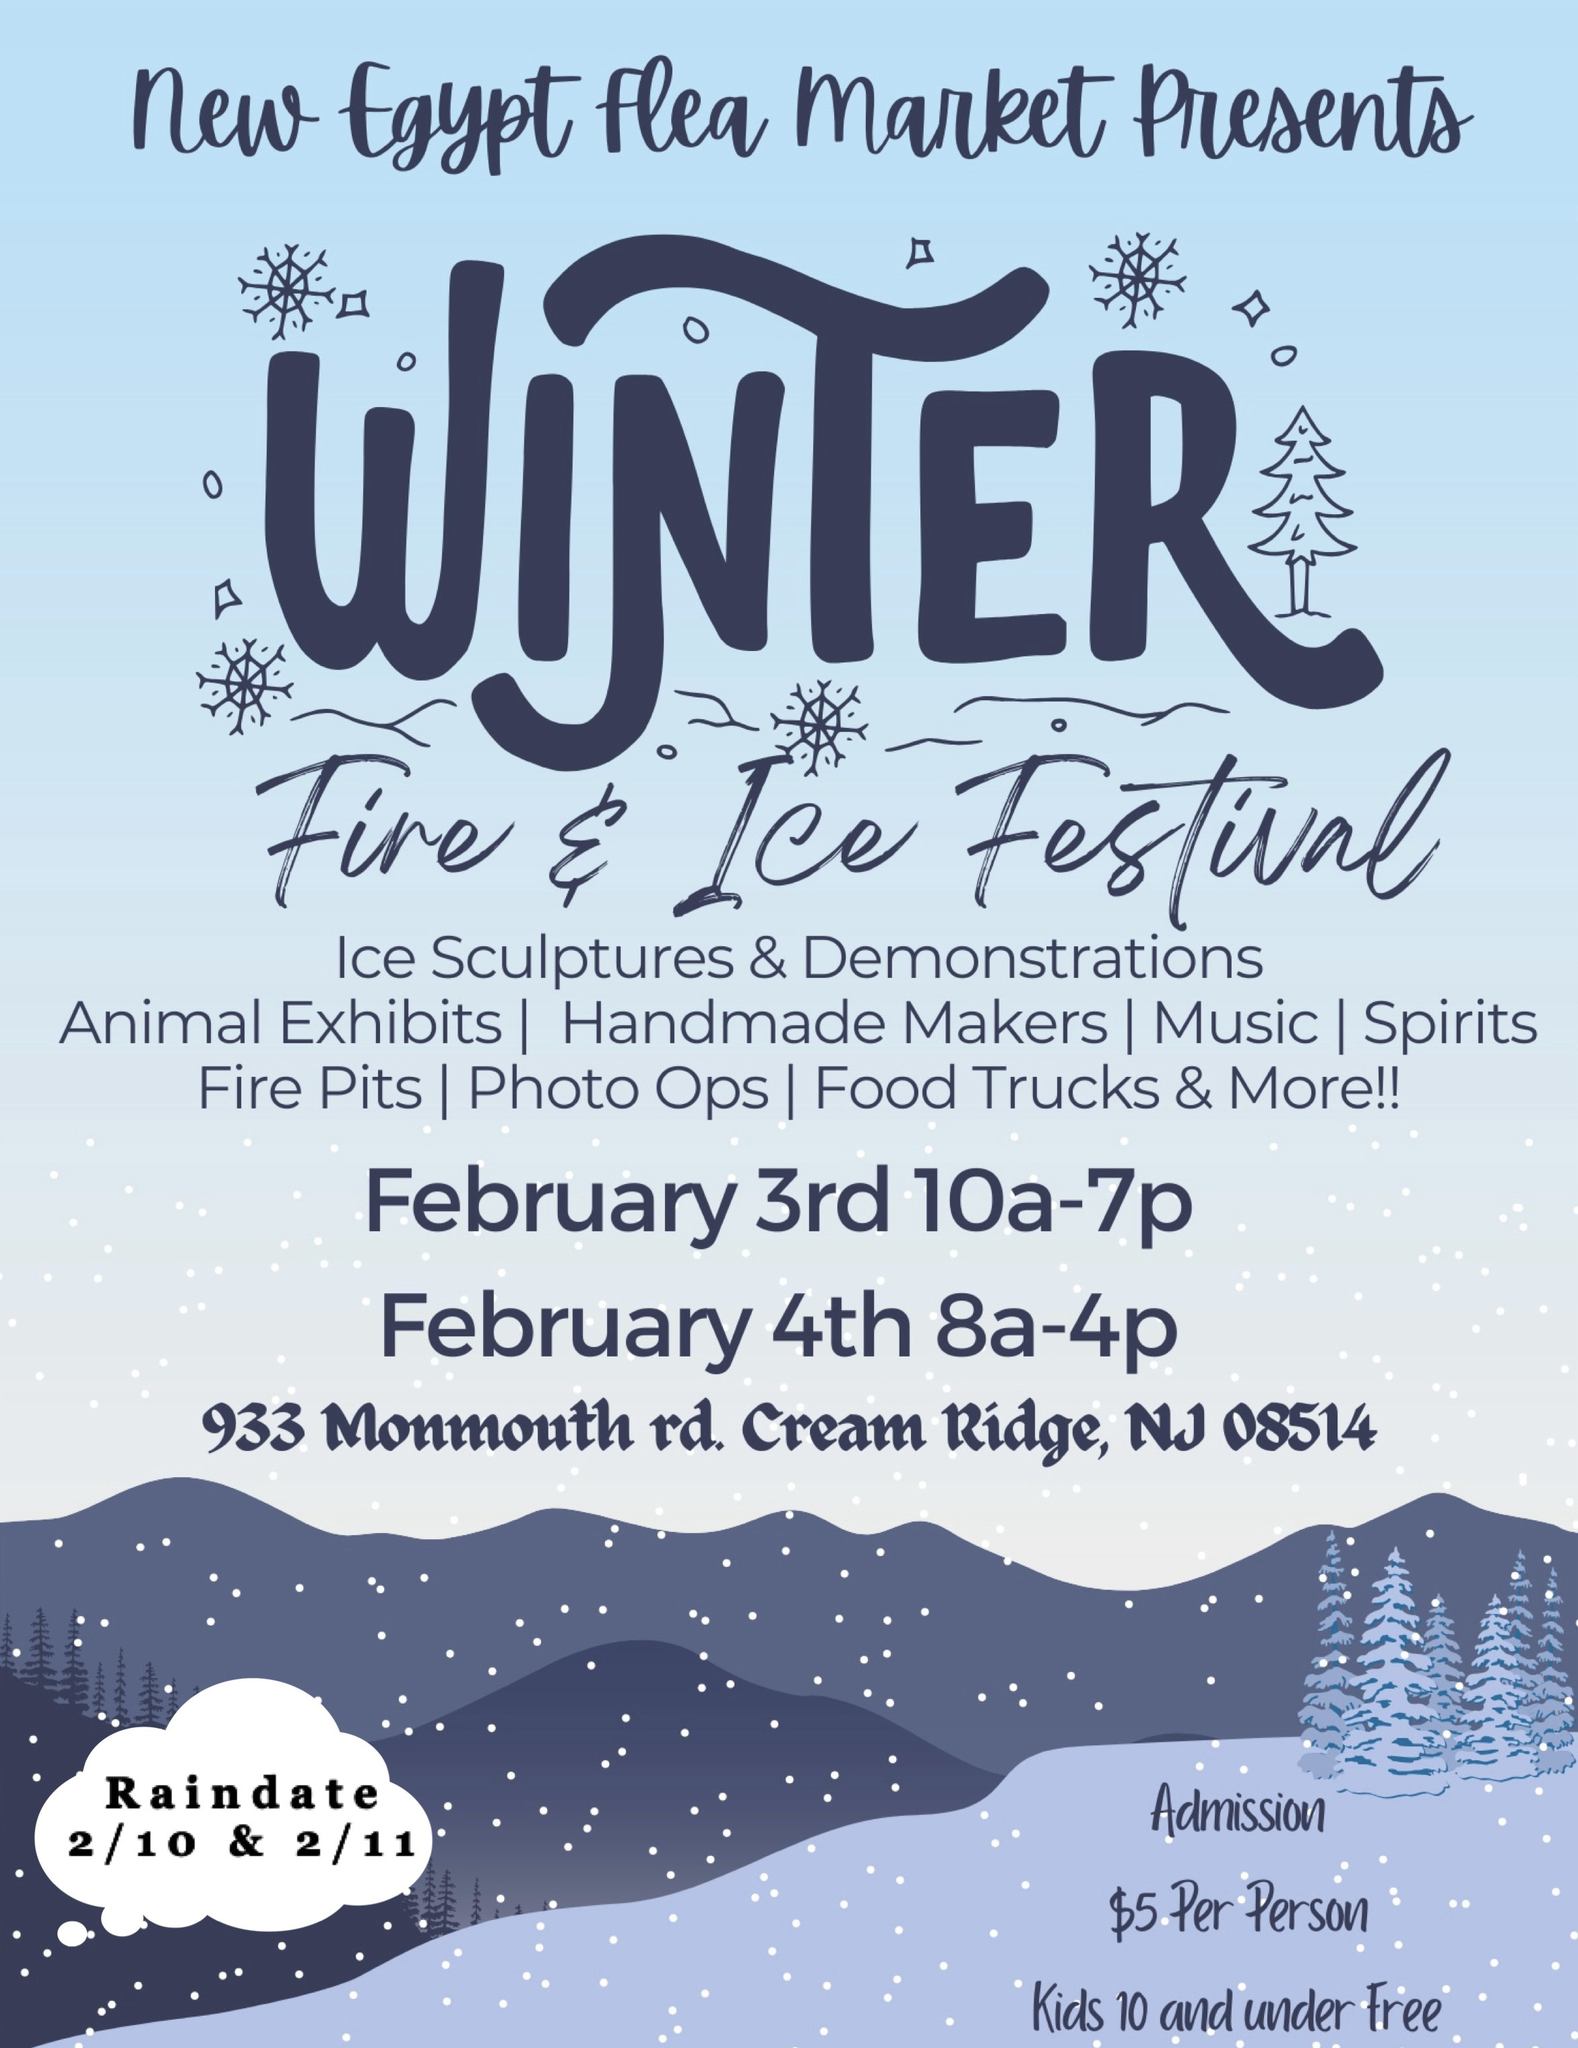 Winter Fire and Ice Festival at New Egypt Flea Market